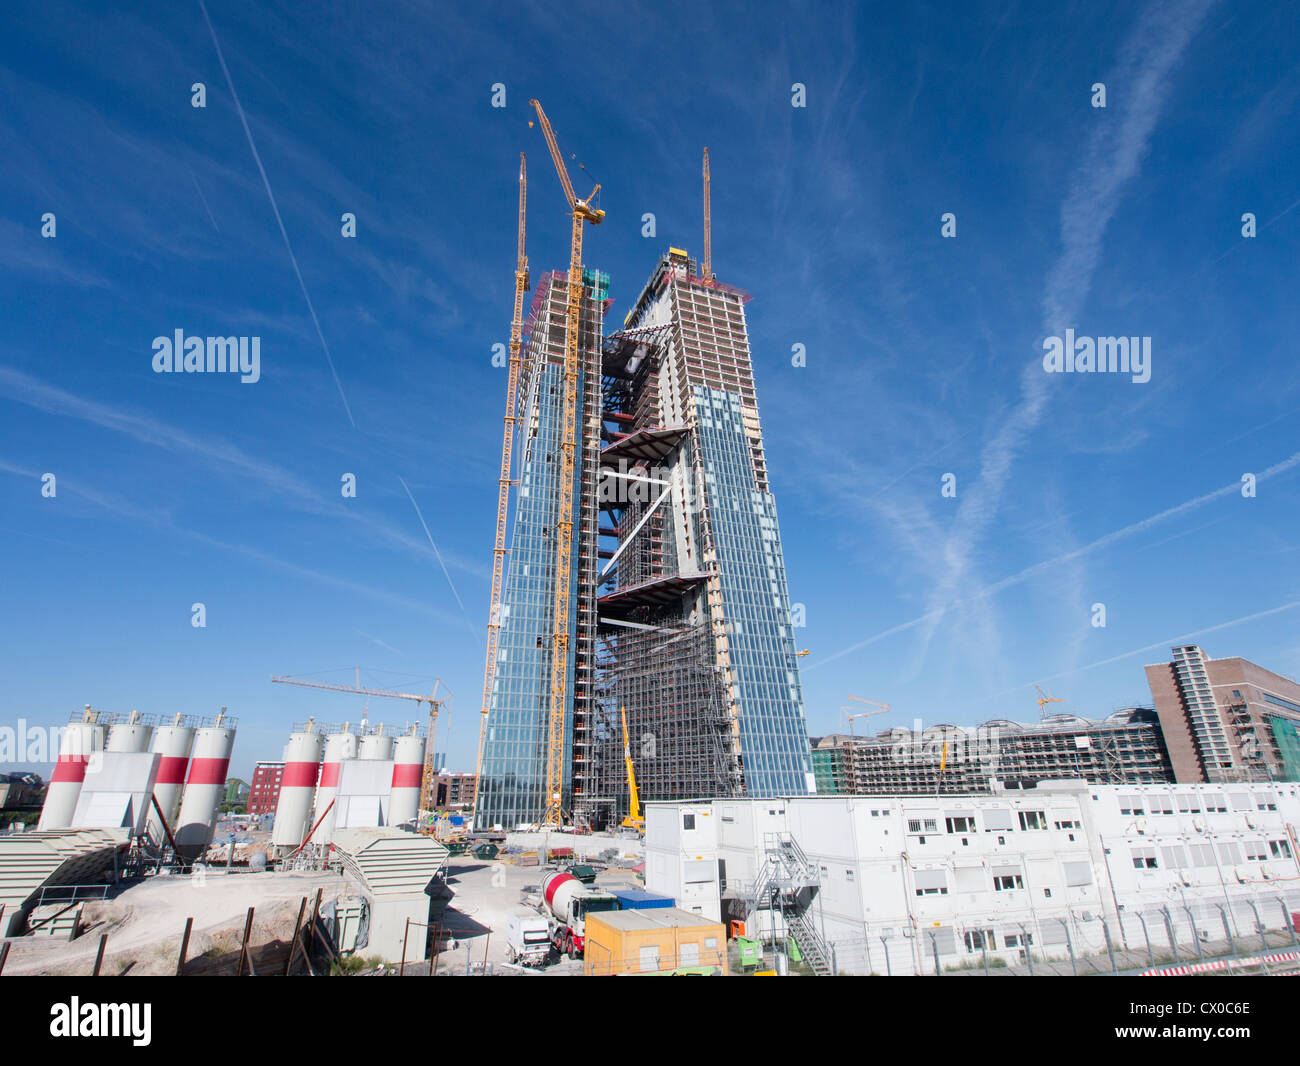 New headquarters for European Central Bank , ECB, under construction in Frankfurt Germany; Architect Coop Himmelb(l)au Stock Photo